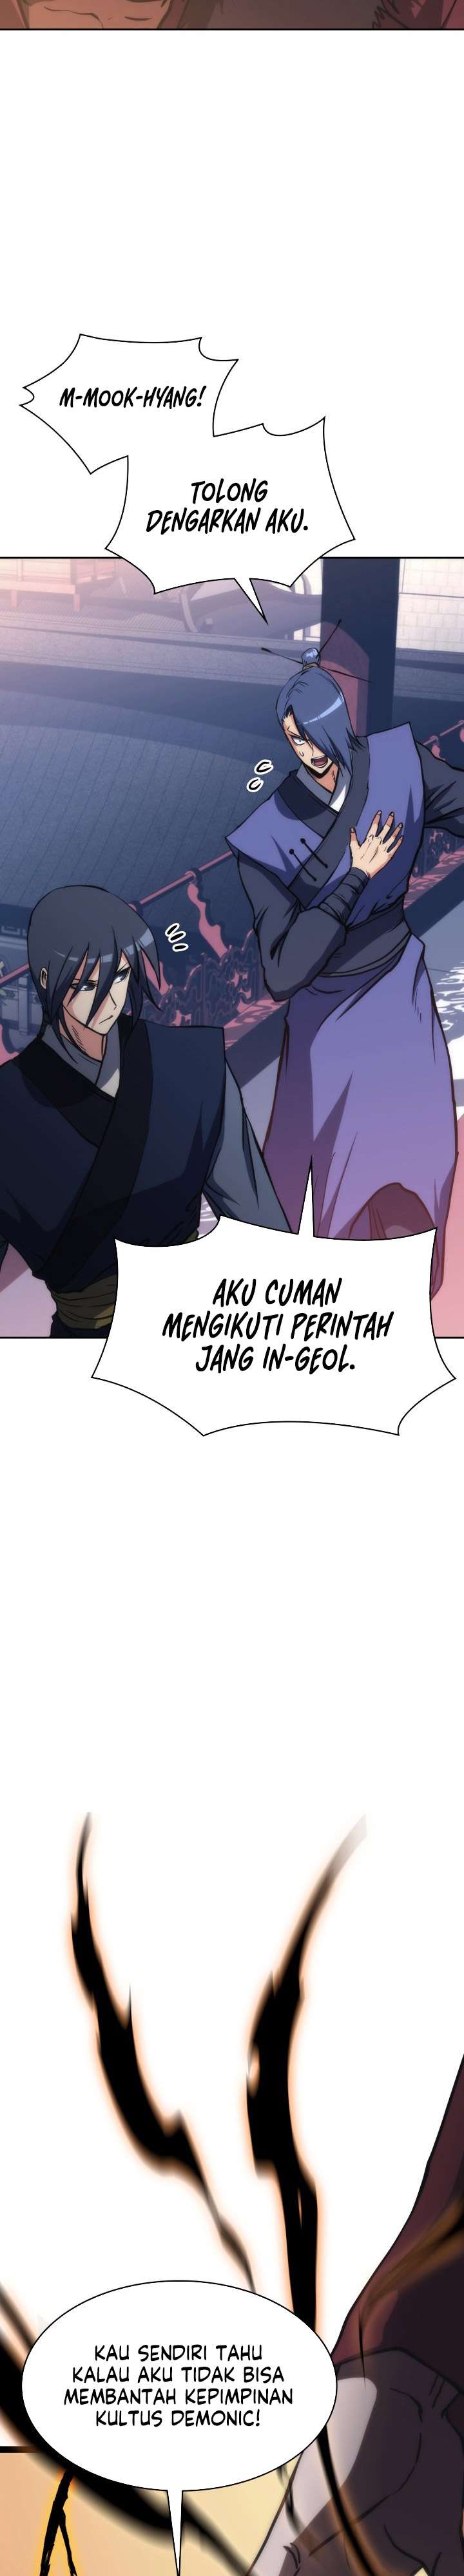 MookHyang – The Origin Chapter 45